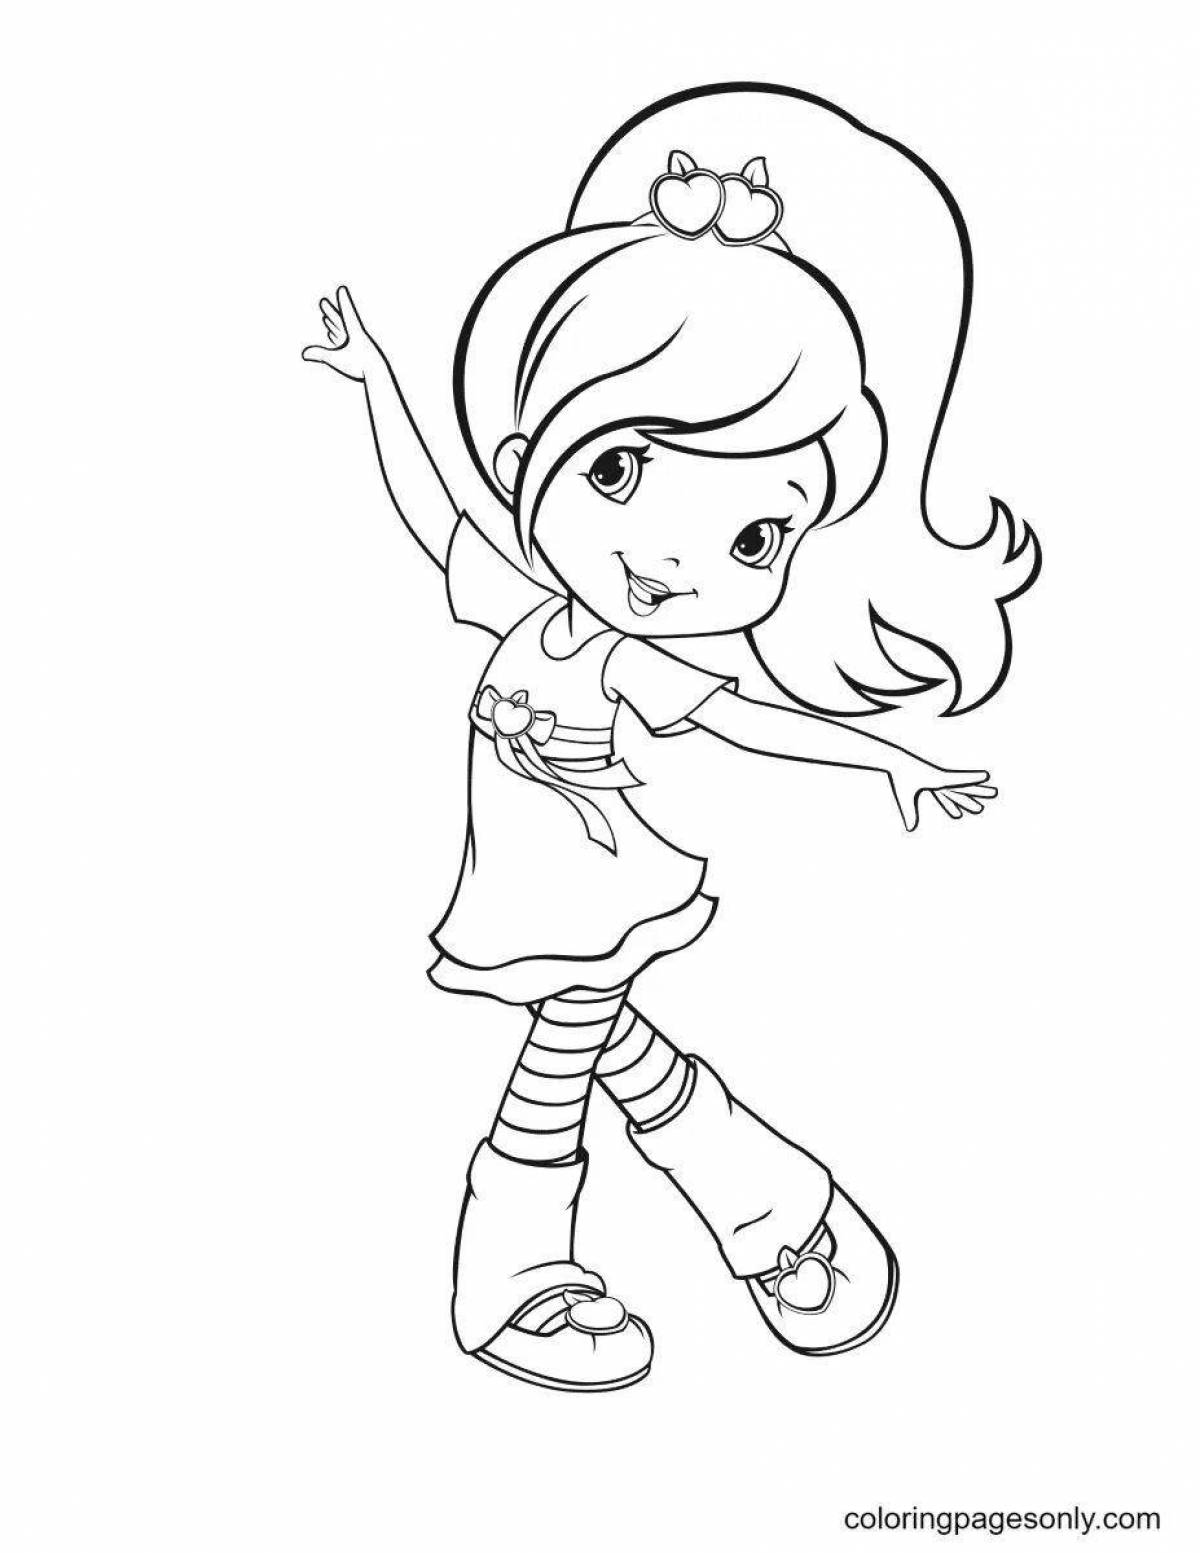 Coloring page energetic dance